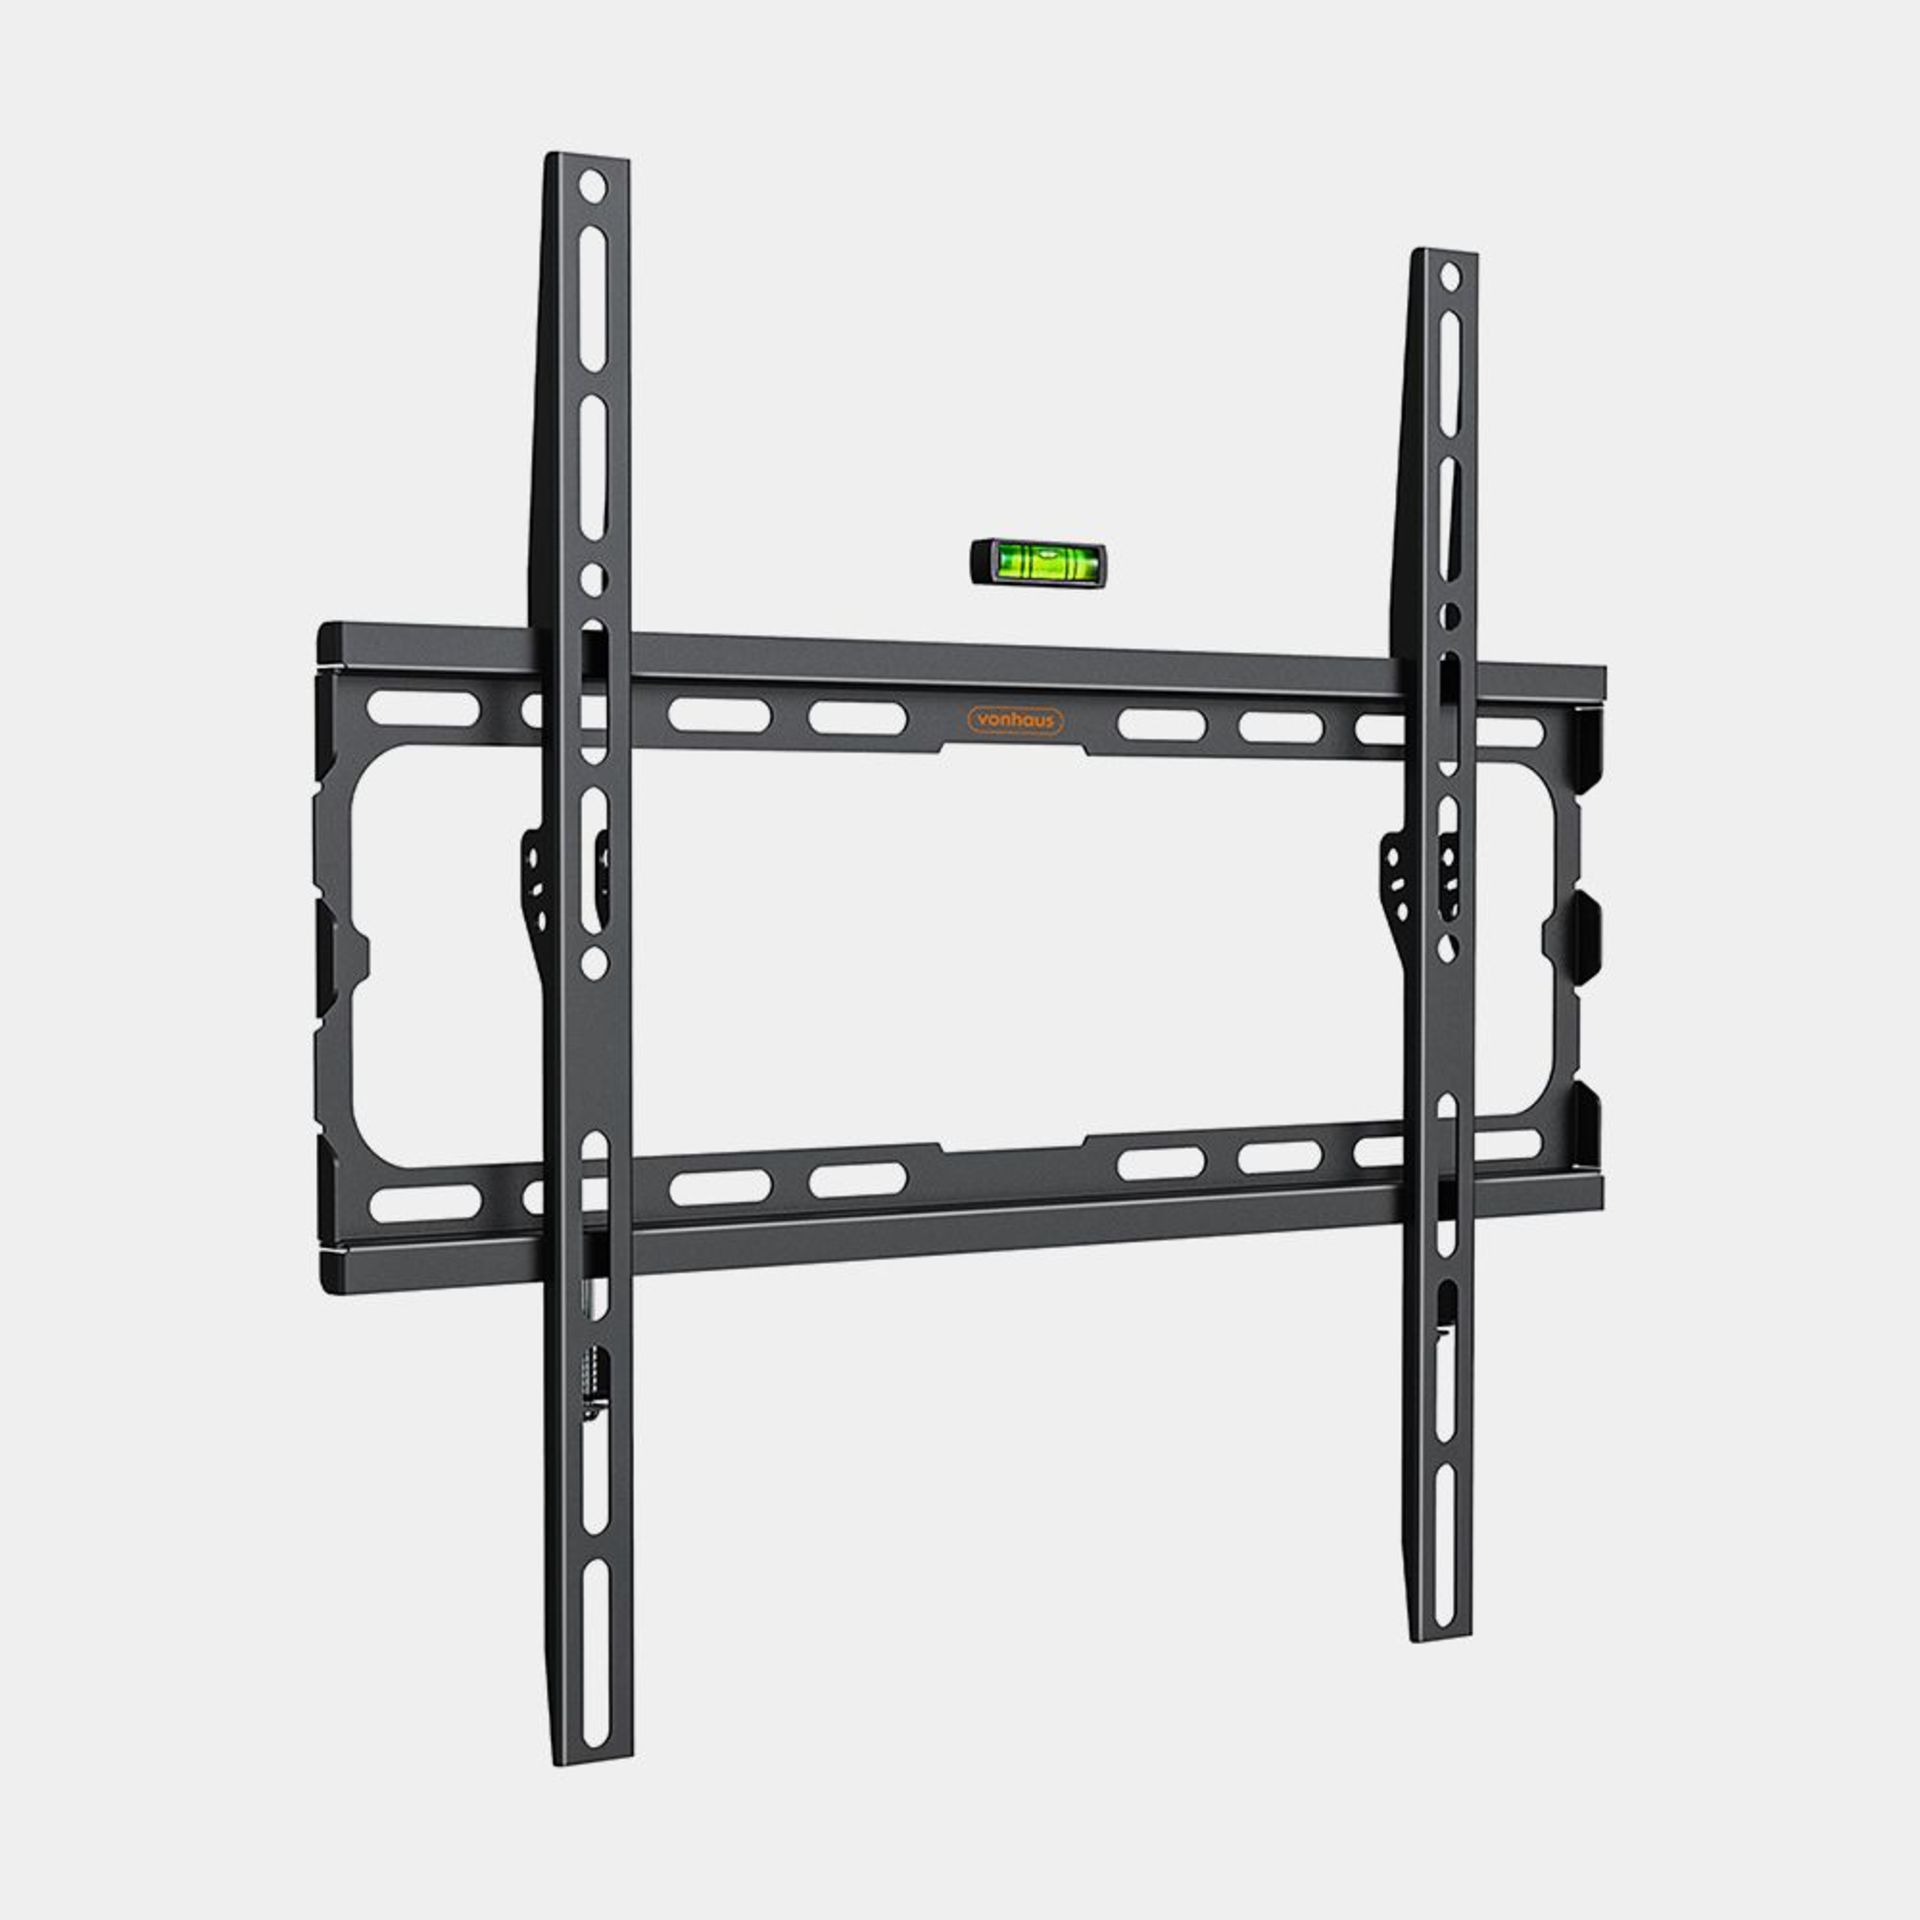 3 x 32-55 inch Flat-to-wall TV bracket. - BI. With easy to follow, comprehensive assembly